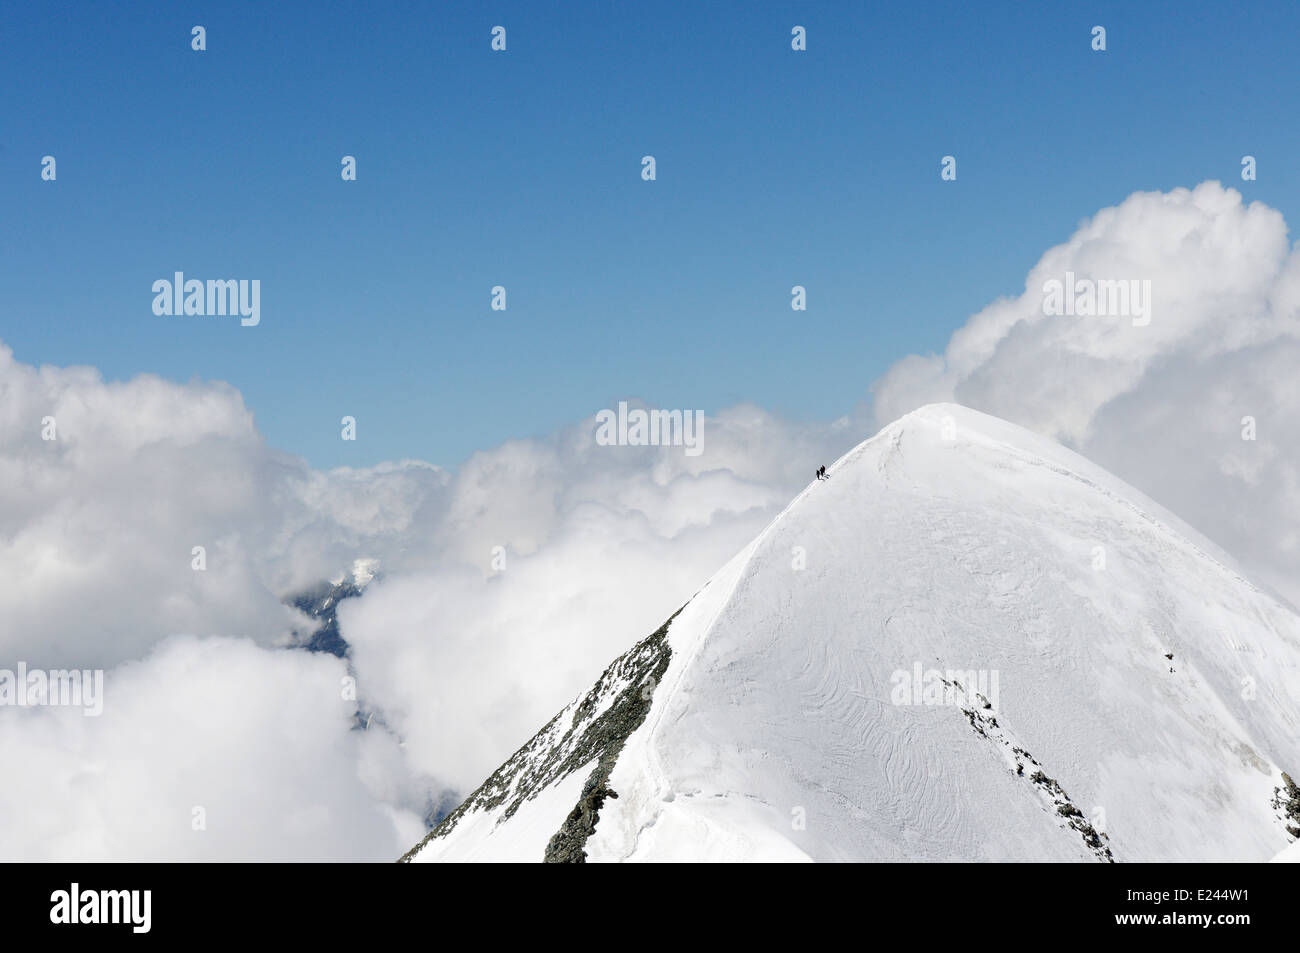 Climbers on the superb airy traverse of the Breithorn in the Swiss Alps Stock Photo